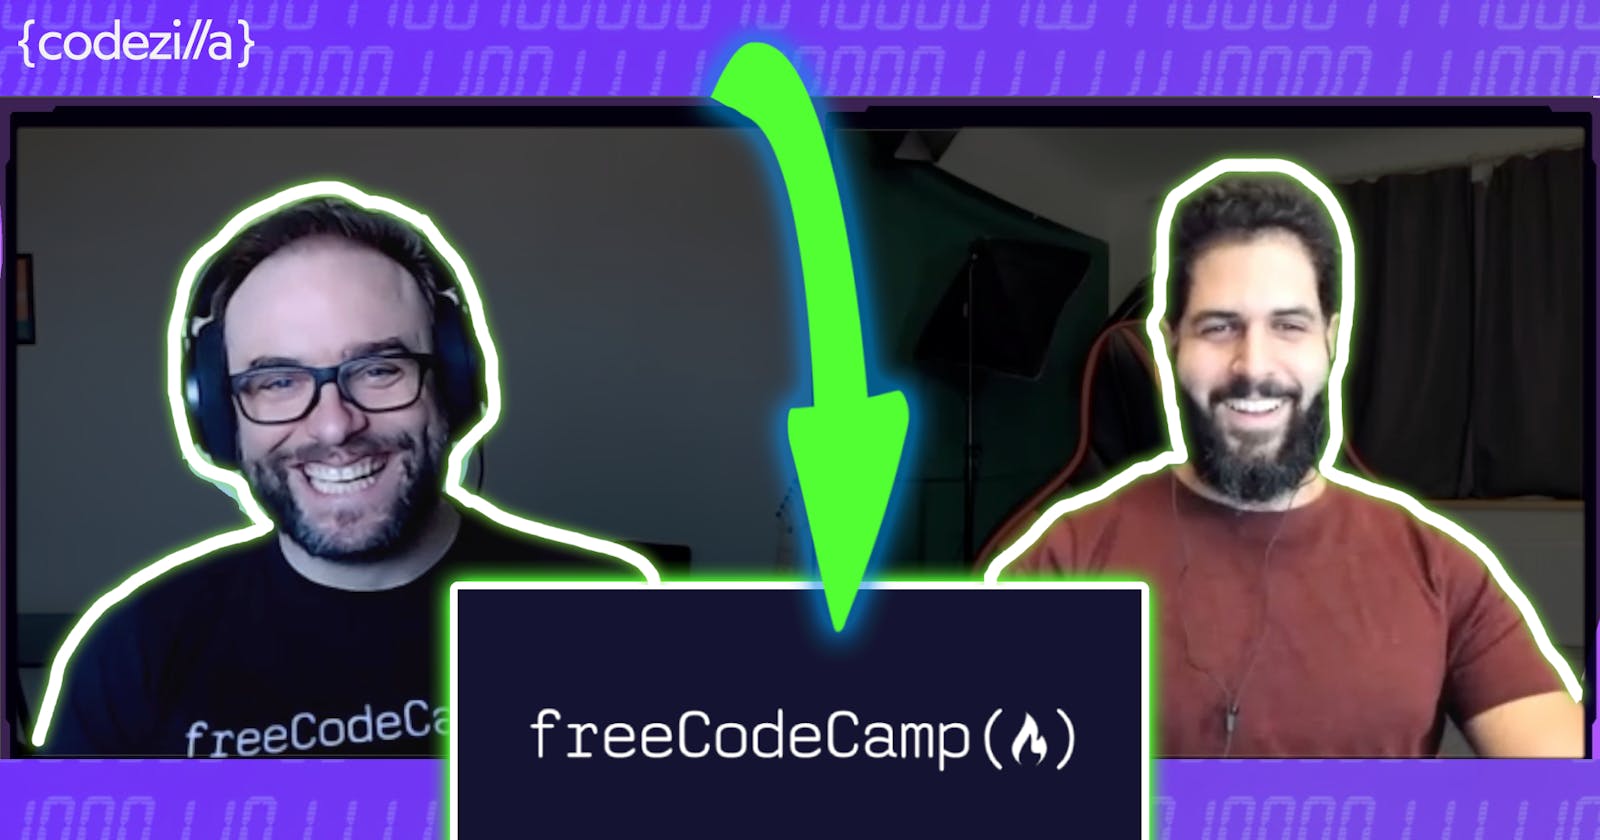 How did FreeCodeCamp start?